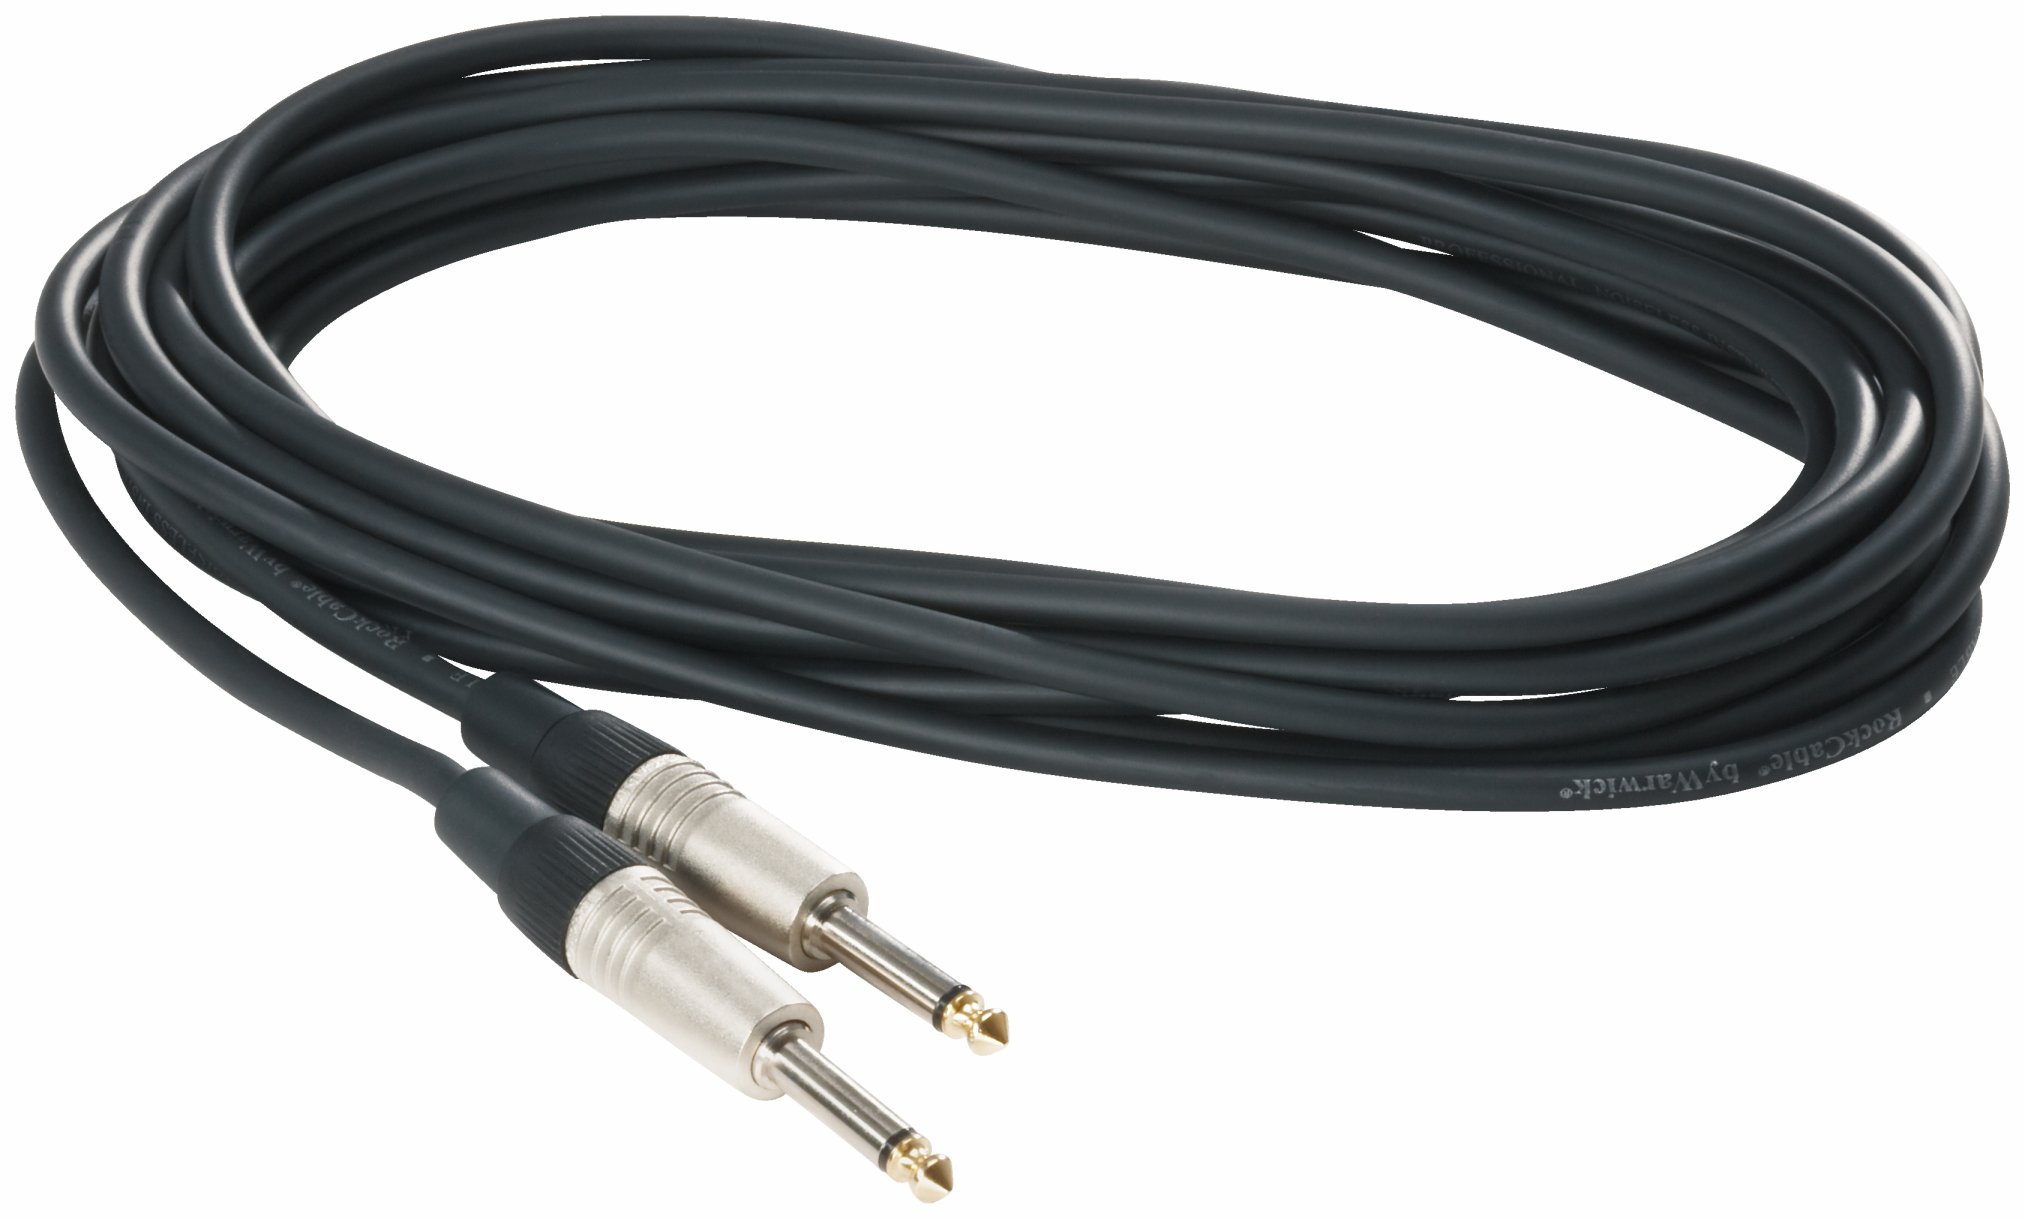 RockCable Instrument Cable - straight TS (6.3 mm / 1/4"), 6 m / 19.7 ft - Black